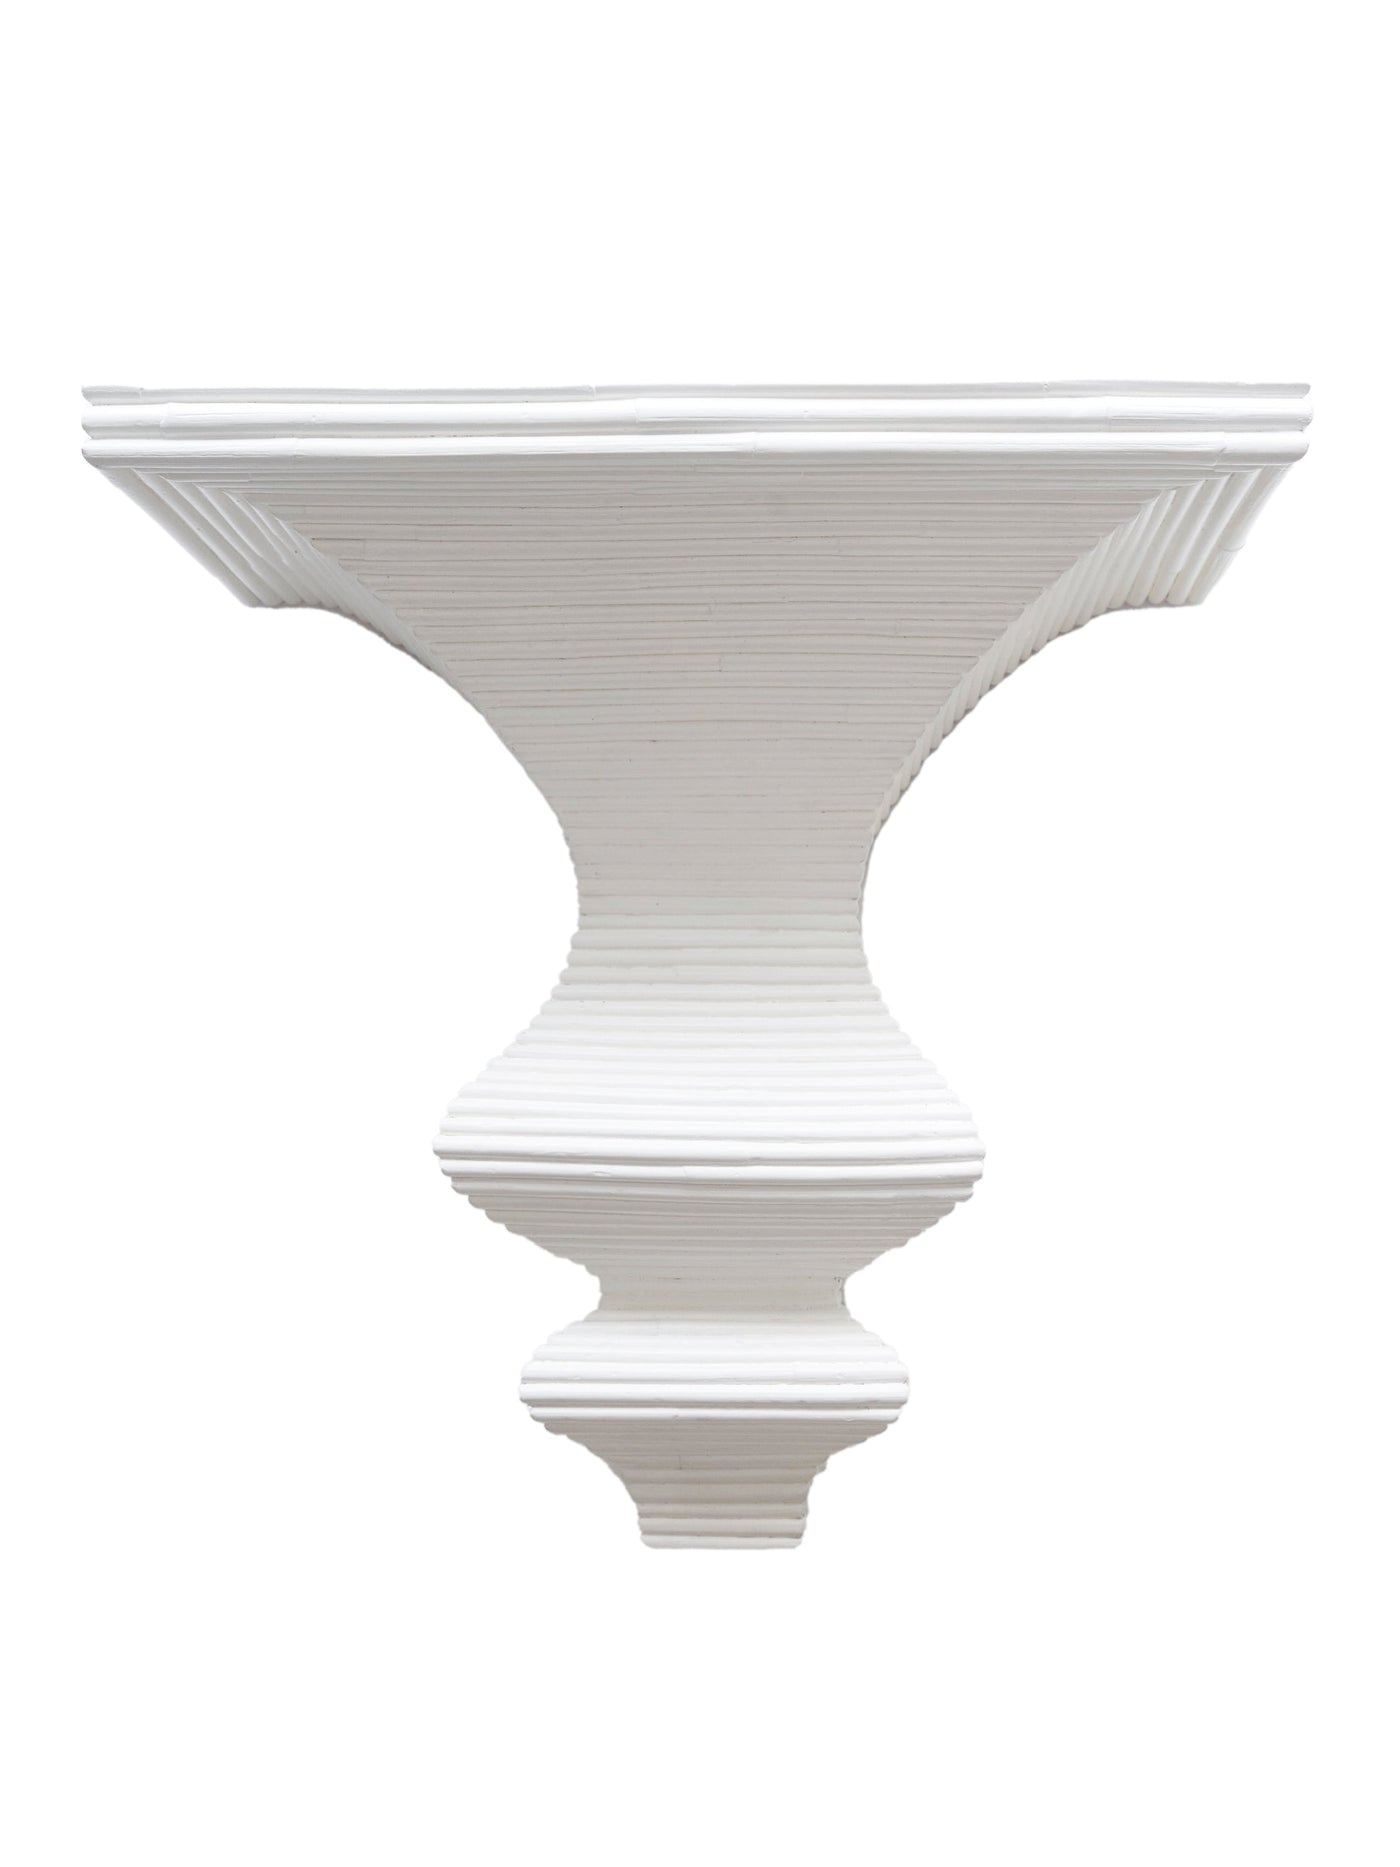 Athena Rattan Wall Bracket in White by Permanent Resident